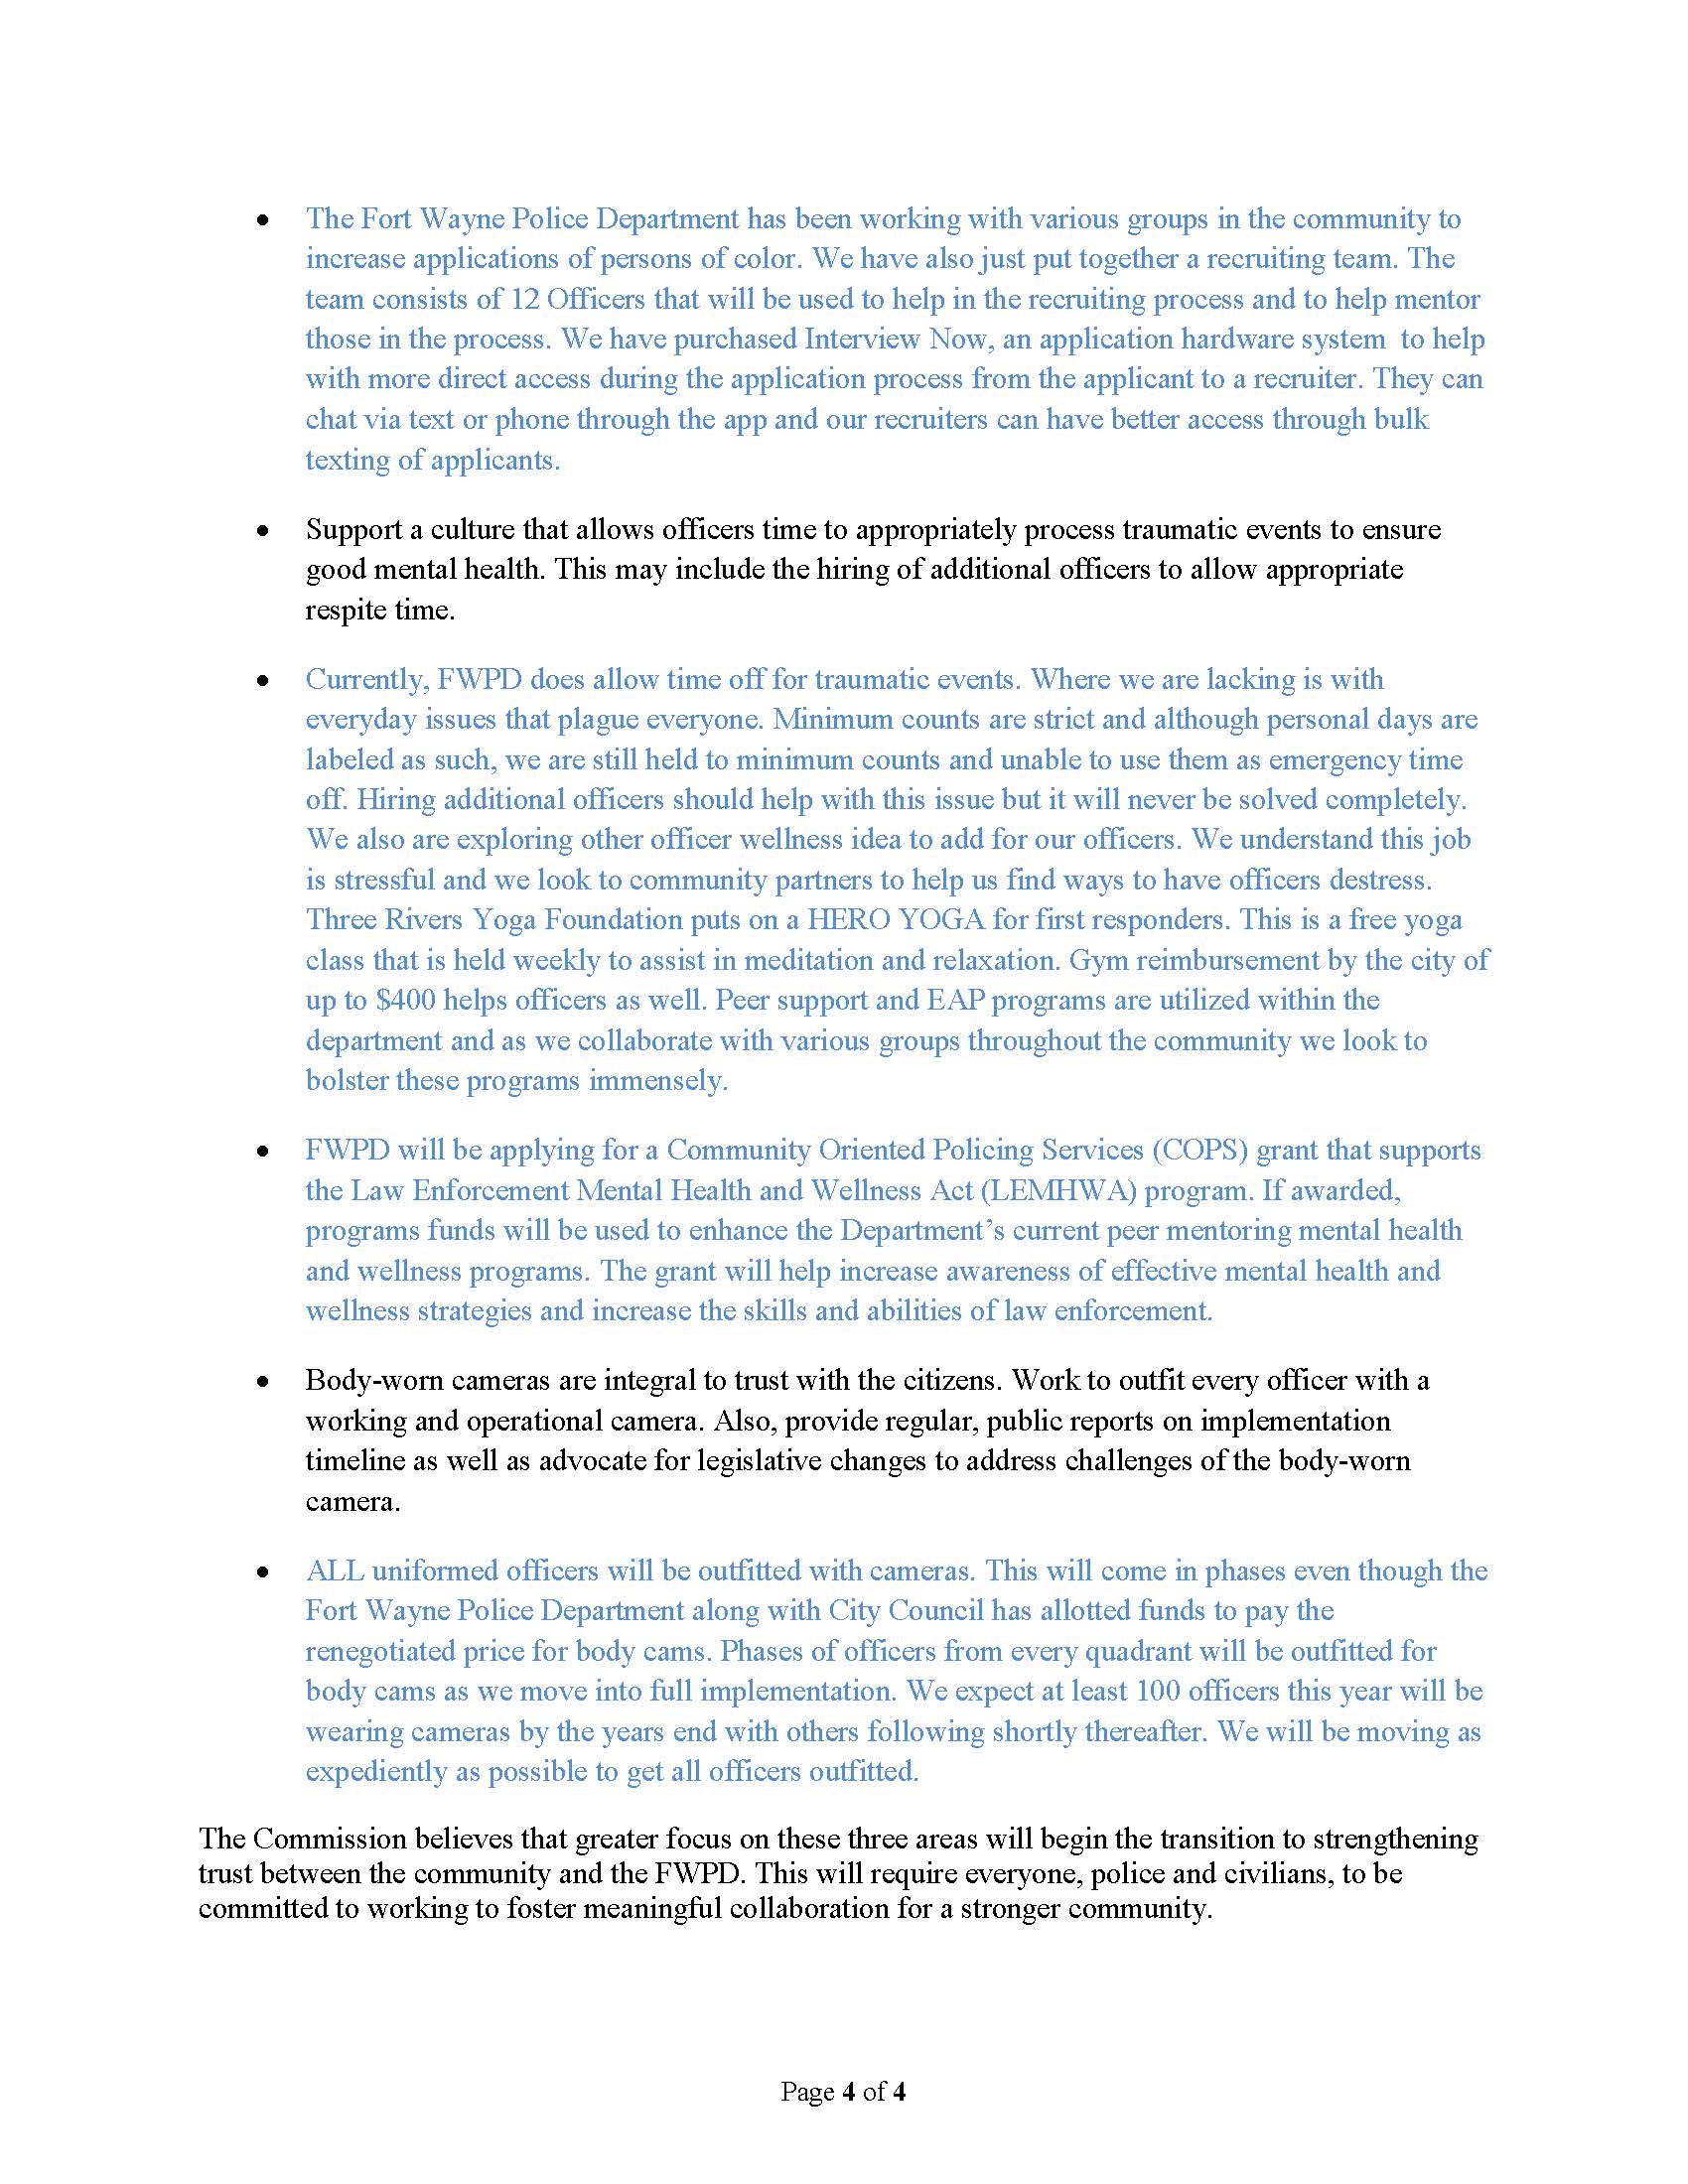 Executive Summary with Edits Page 4